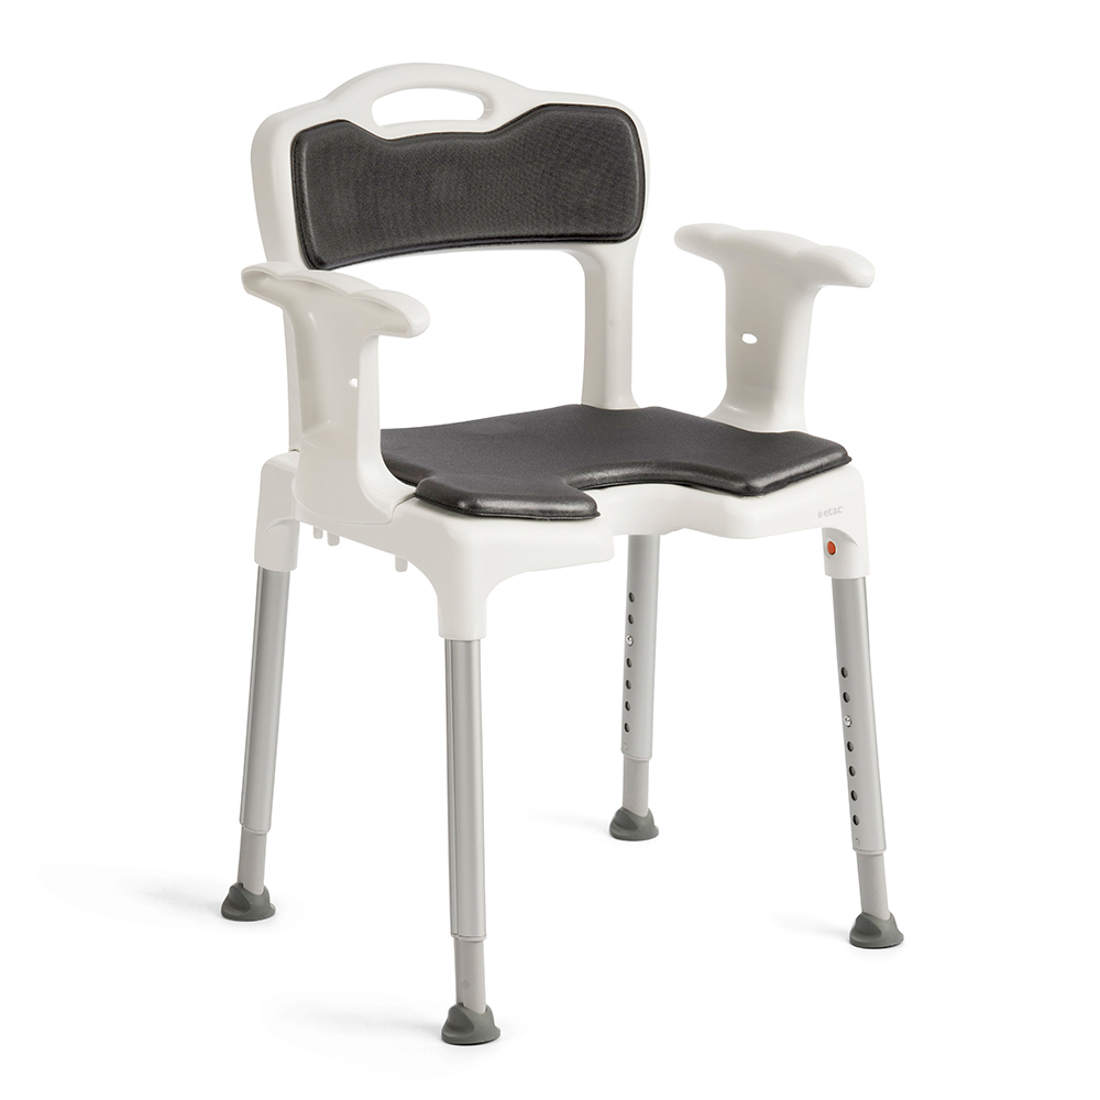 Etac Swift shower chair with seat and back support pad